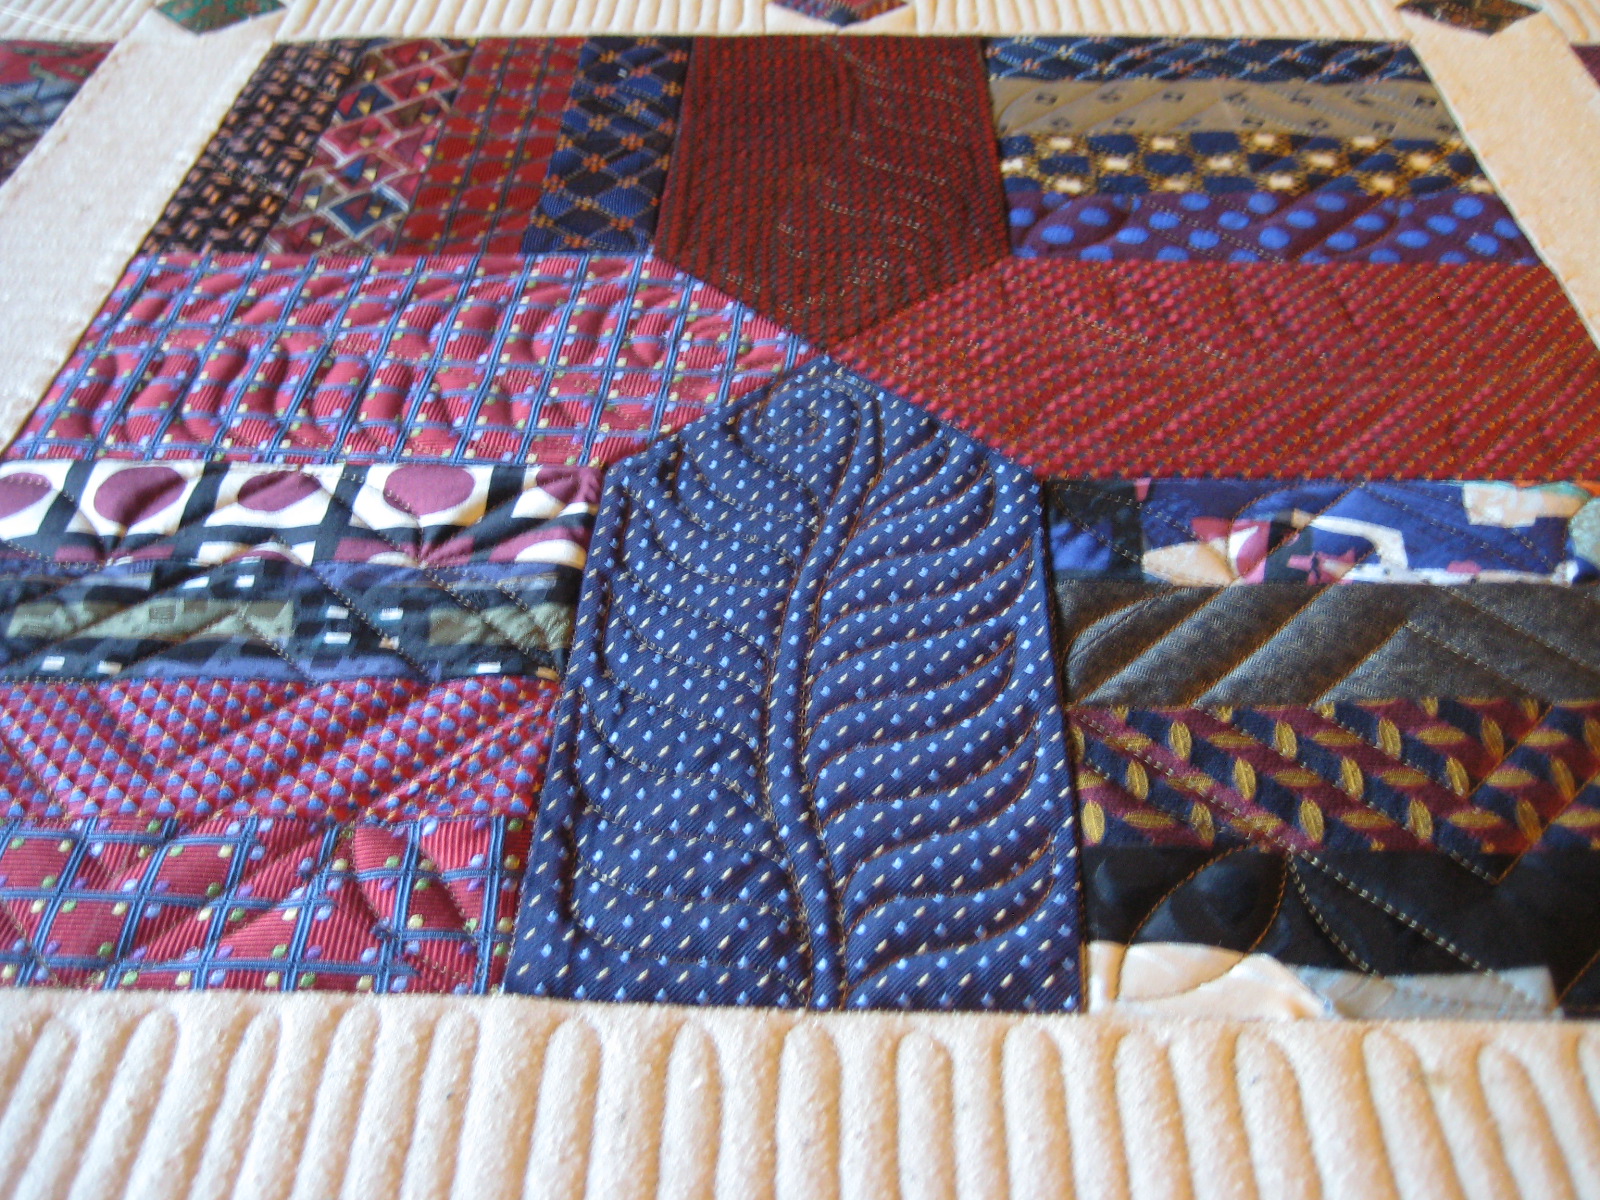 Threads on the floor: Quilting the Tie Quilt